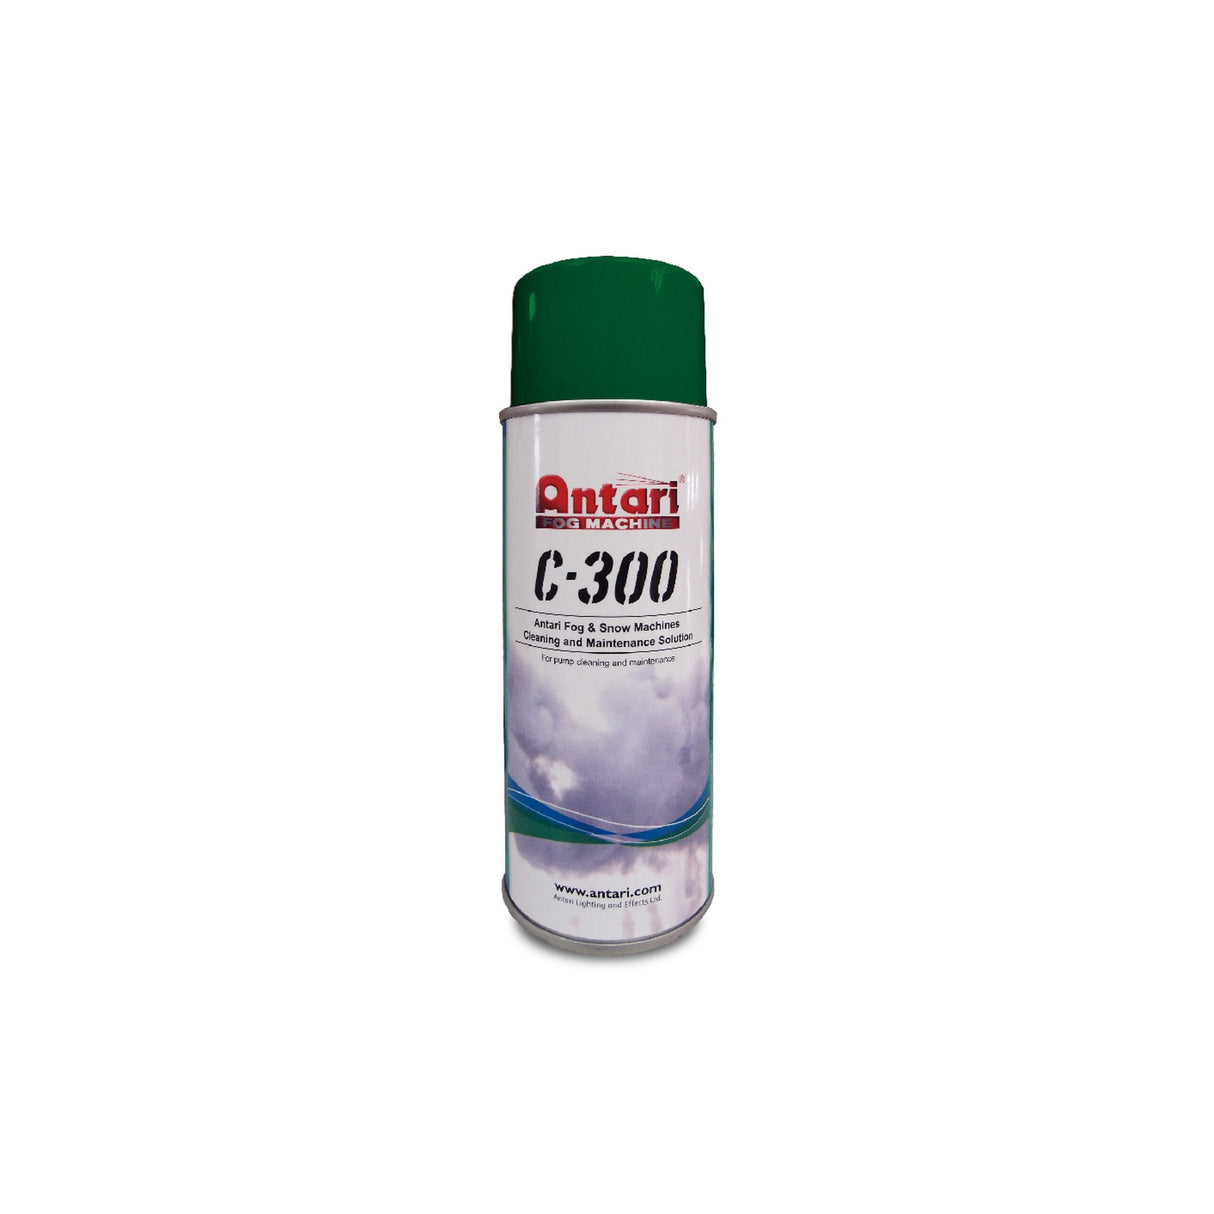 Antari C-300 Cleaning and Maintenance Solution for Effects Machines